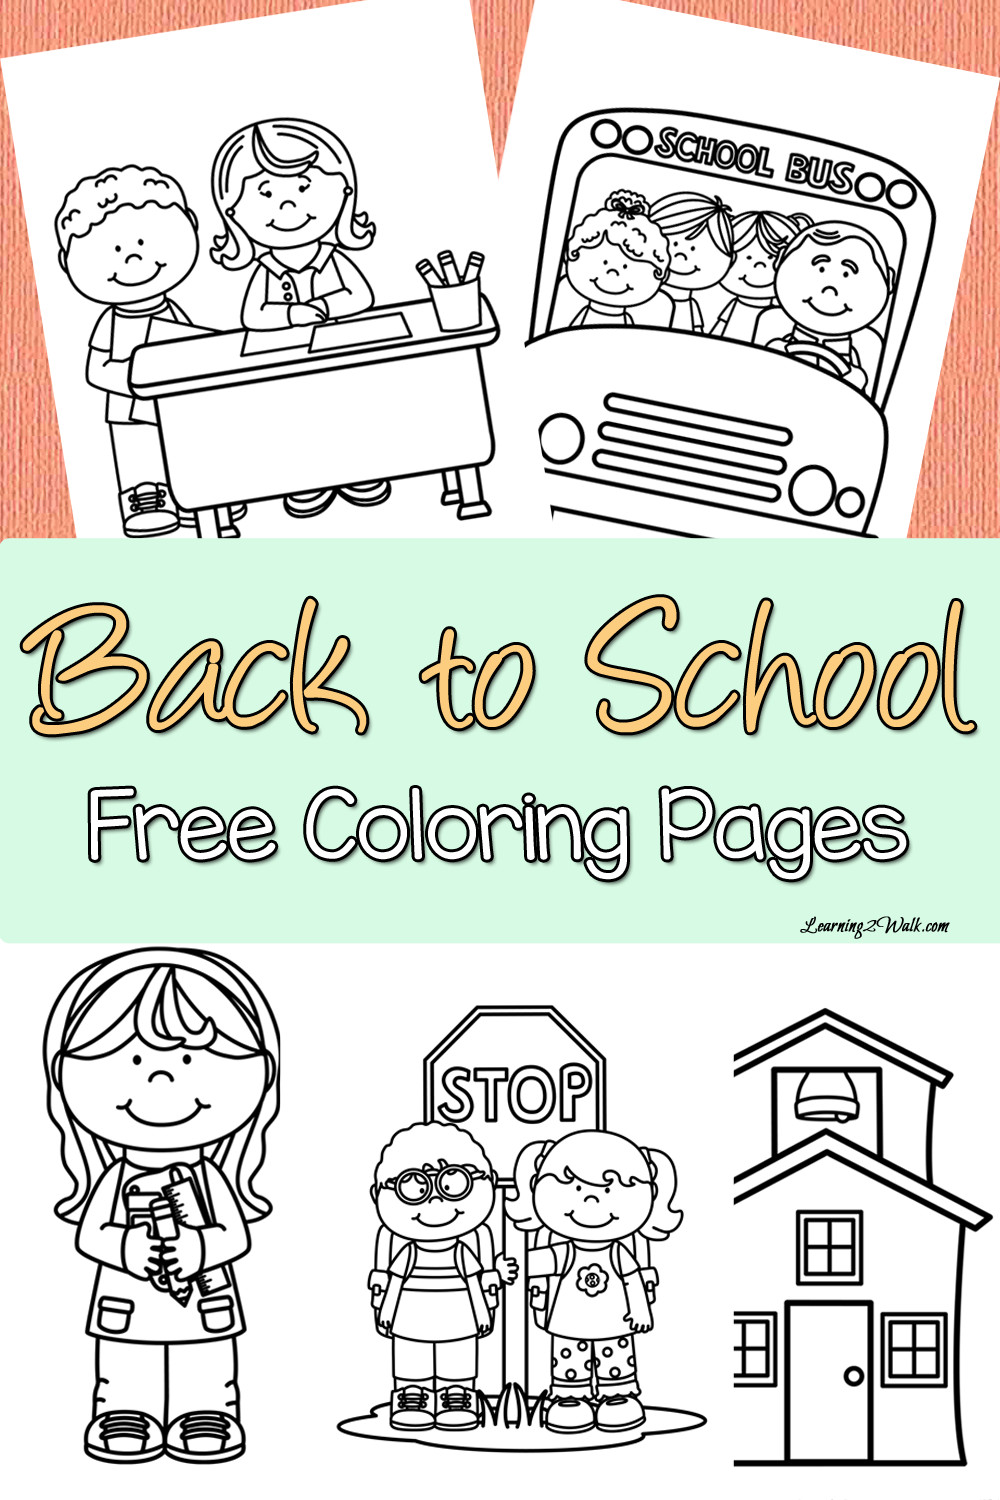 Back To School Coloring Page
 Back to School Free Coloring Page Set